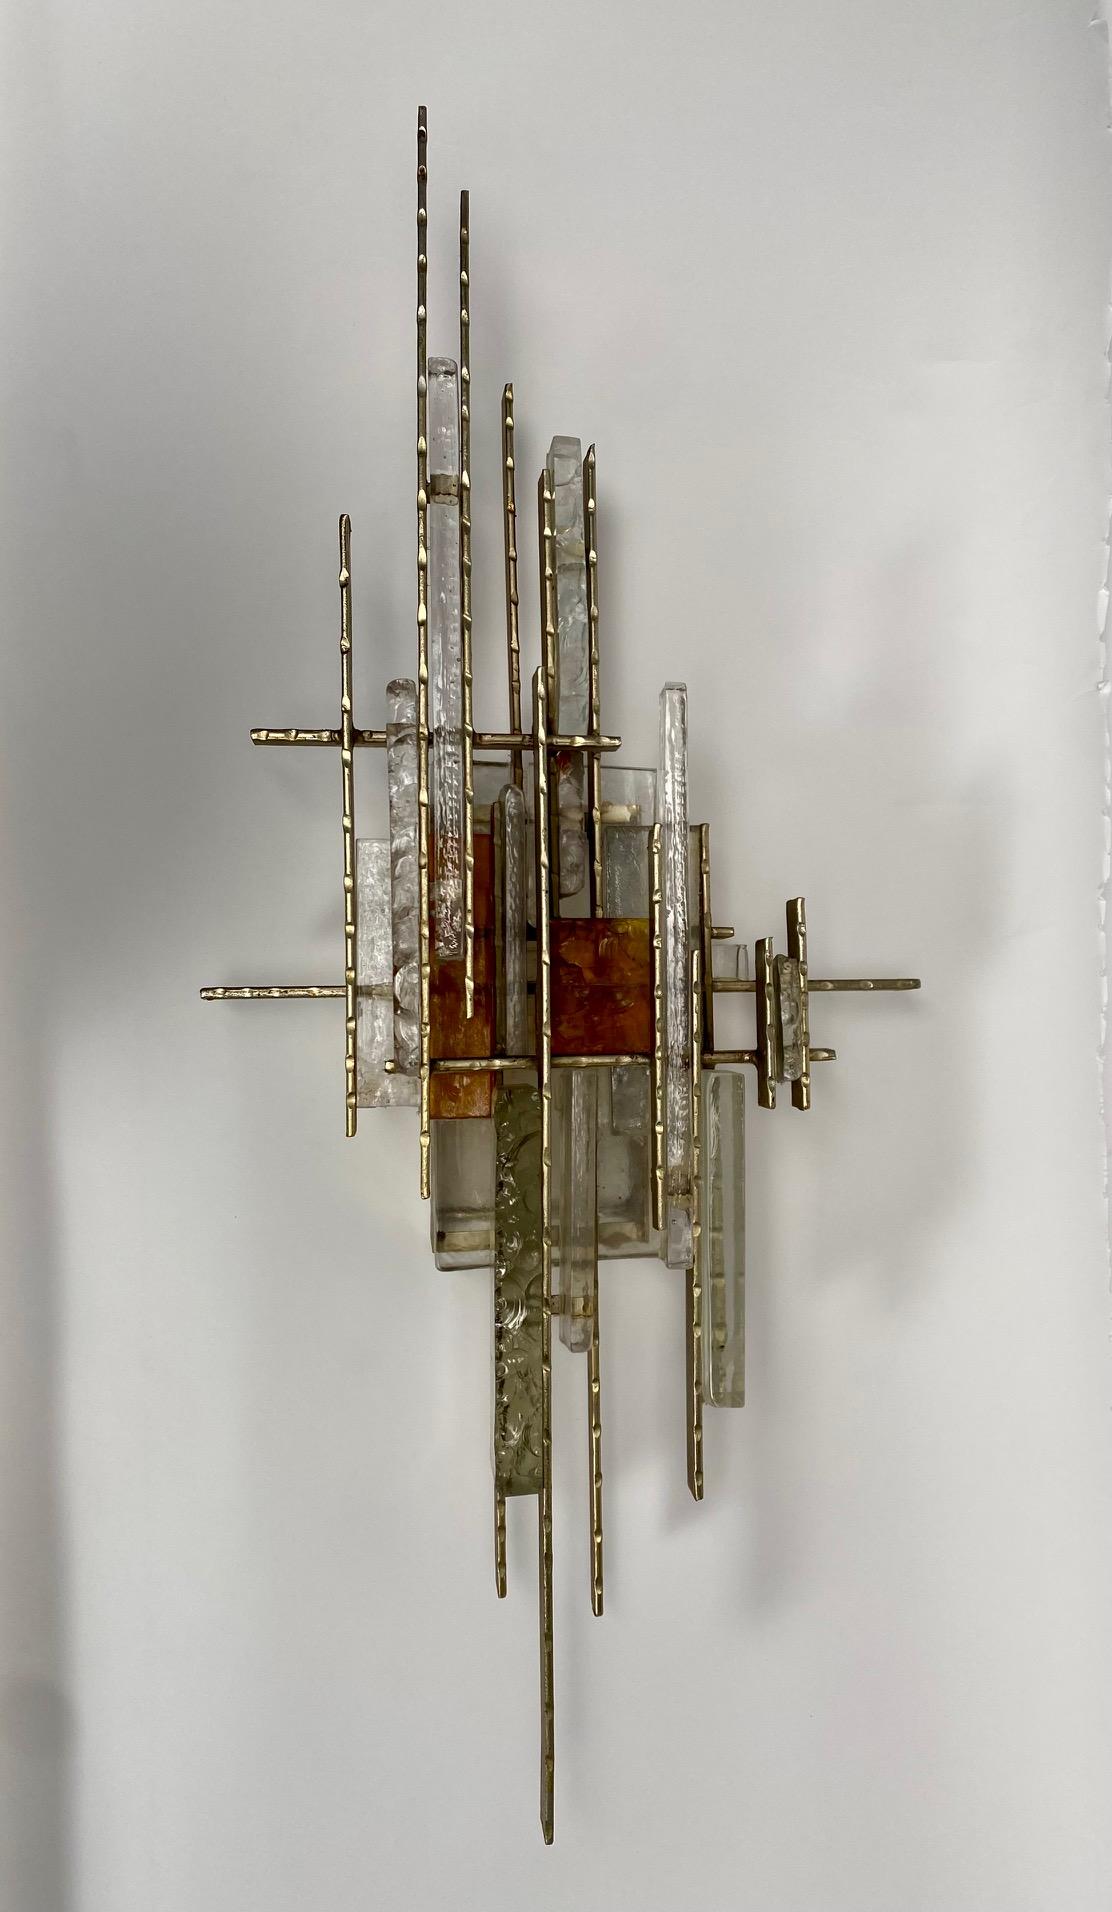 Very large brutalist wall light by Albano Poli for Poliarte, Italy 1970s

A sculptural wall lamp, of considerable size, handcrafted by assembling transparent and colored glass (amber), and metals, giving life to a precious brutalist composition.